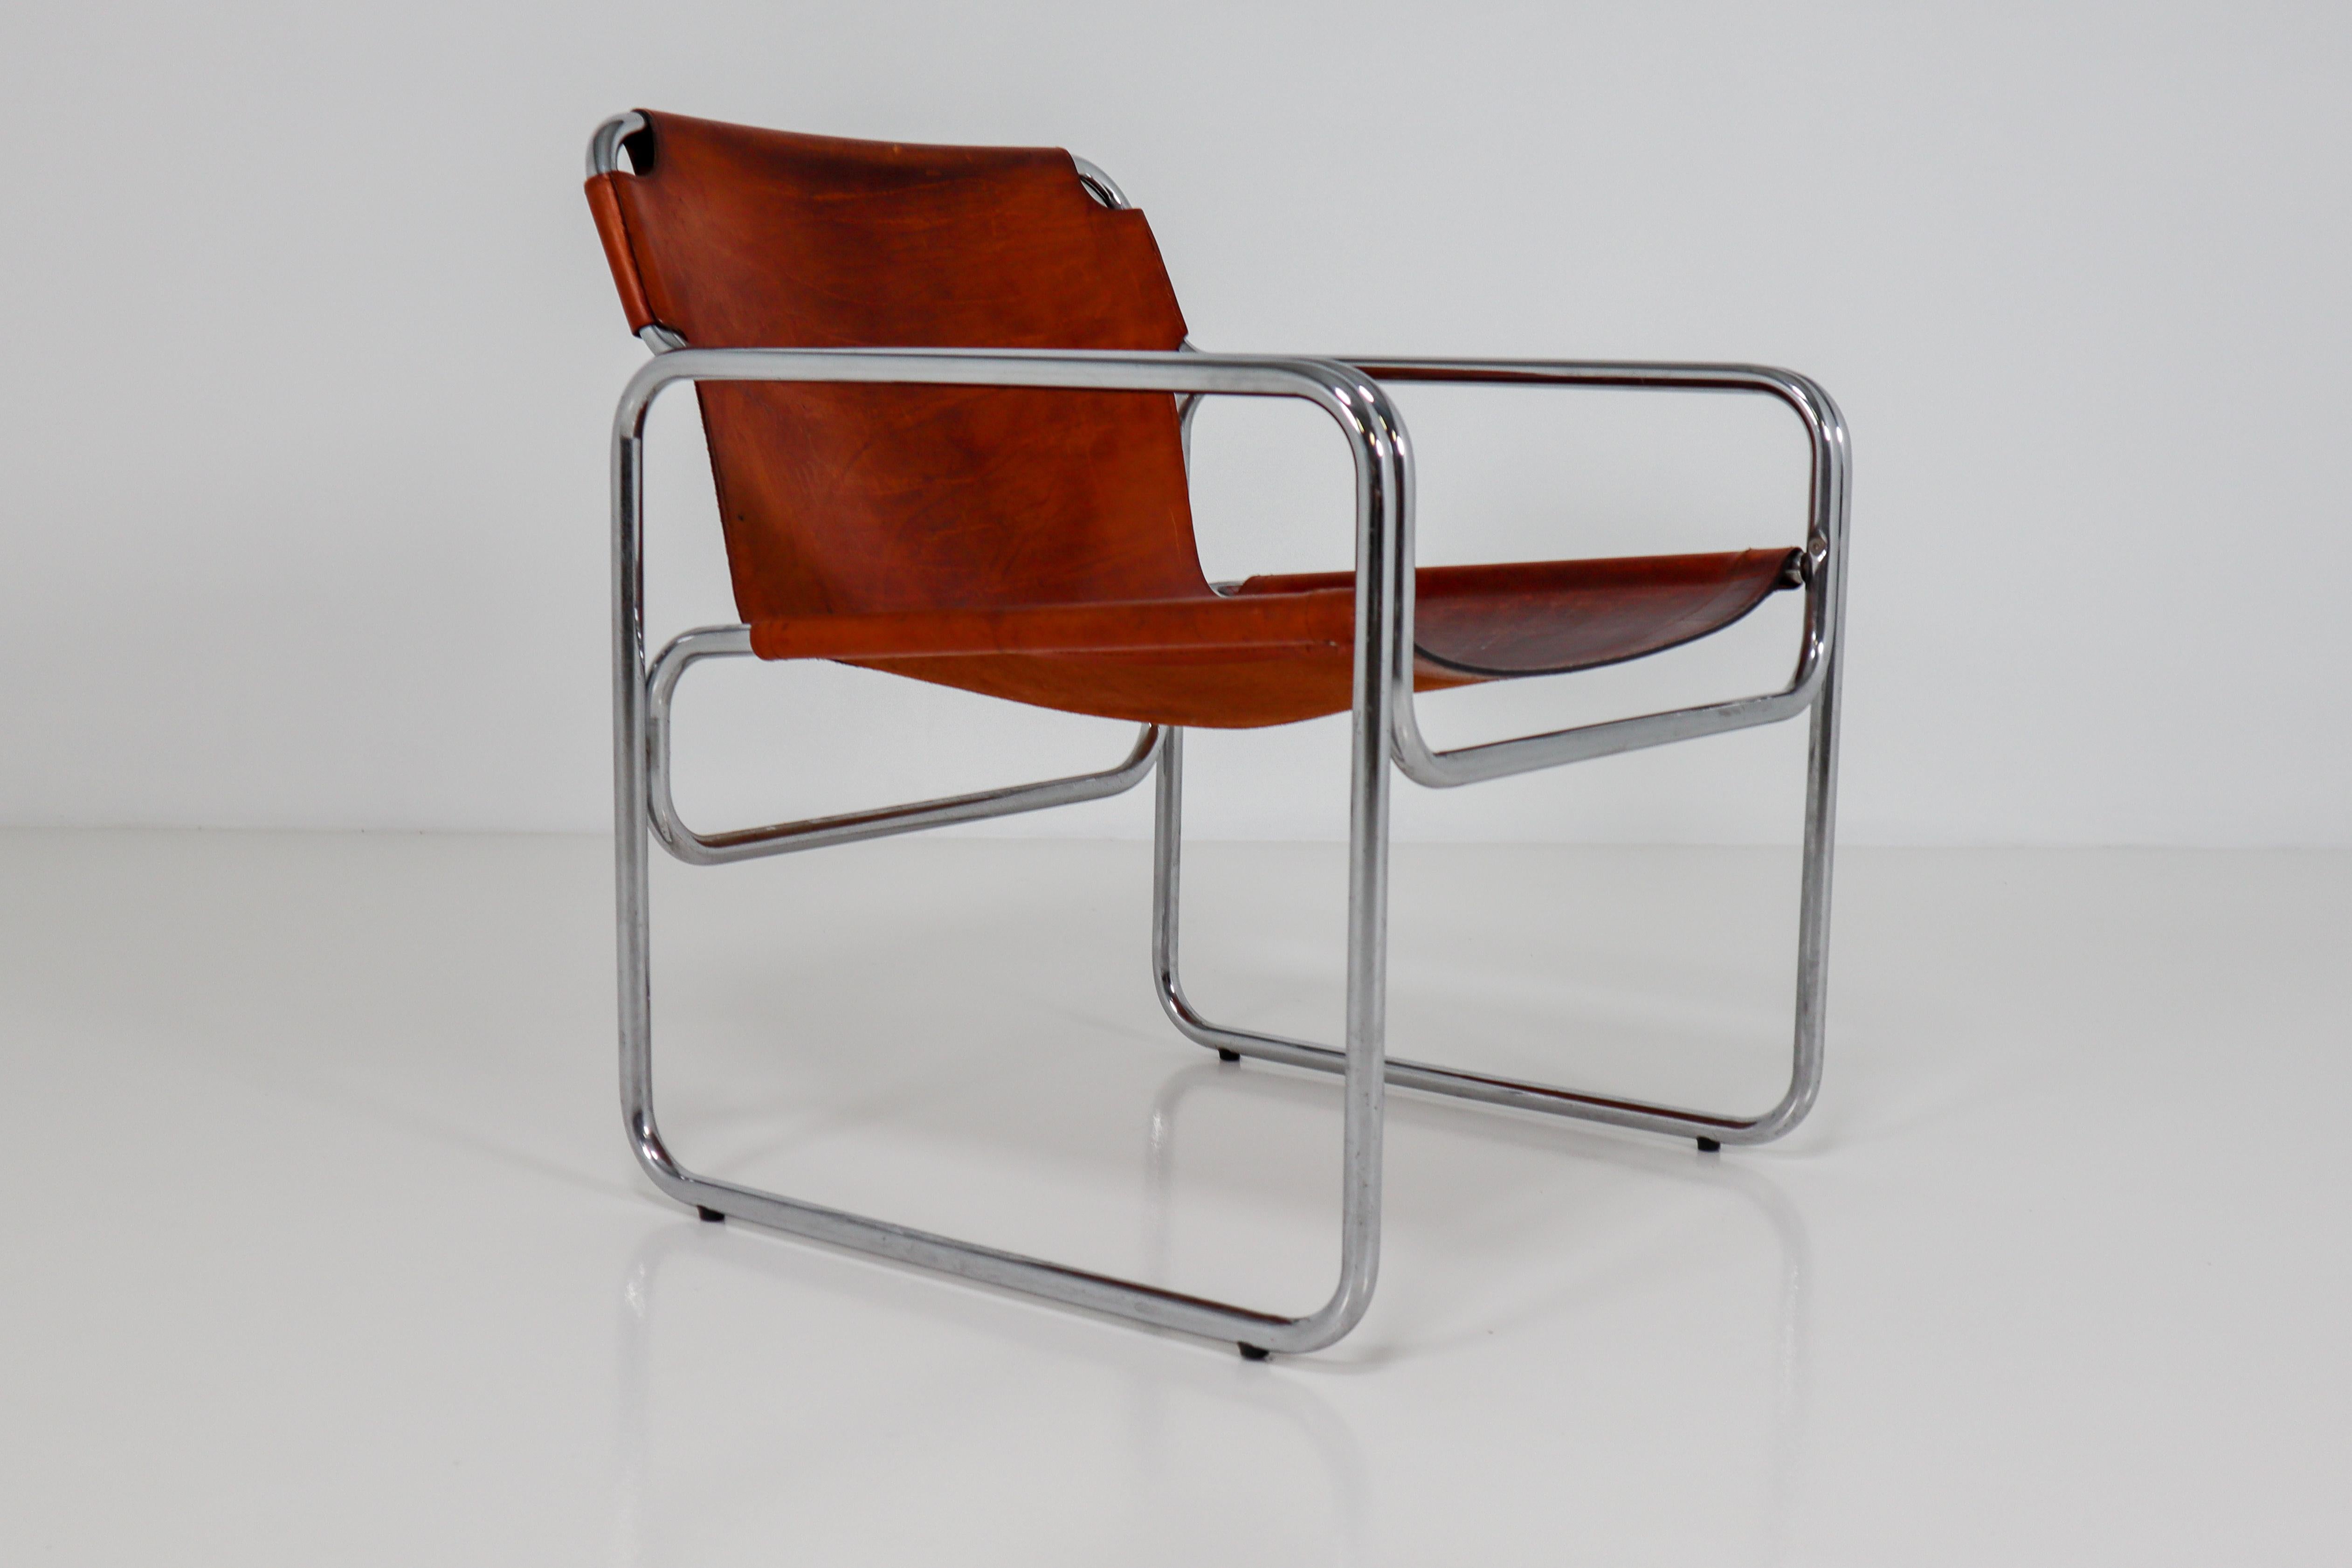 The chair is truly a great example of the radical Bauhaus aesthetic. Original, yet simple and functional, it represents the ethos of the avant-garde movement. The chair contains cognac leather in good vintage condition. This particular chair was